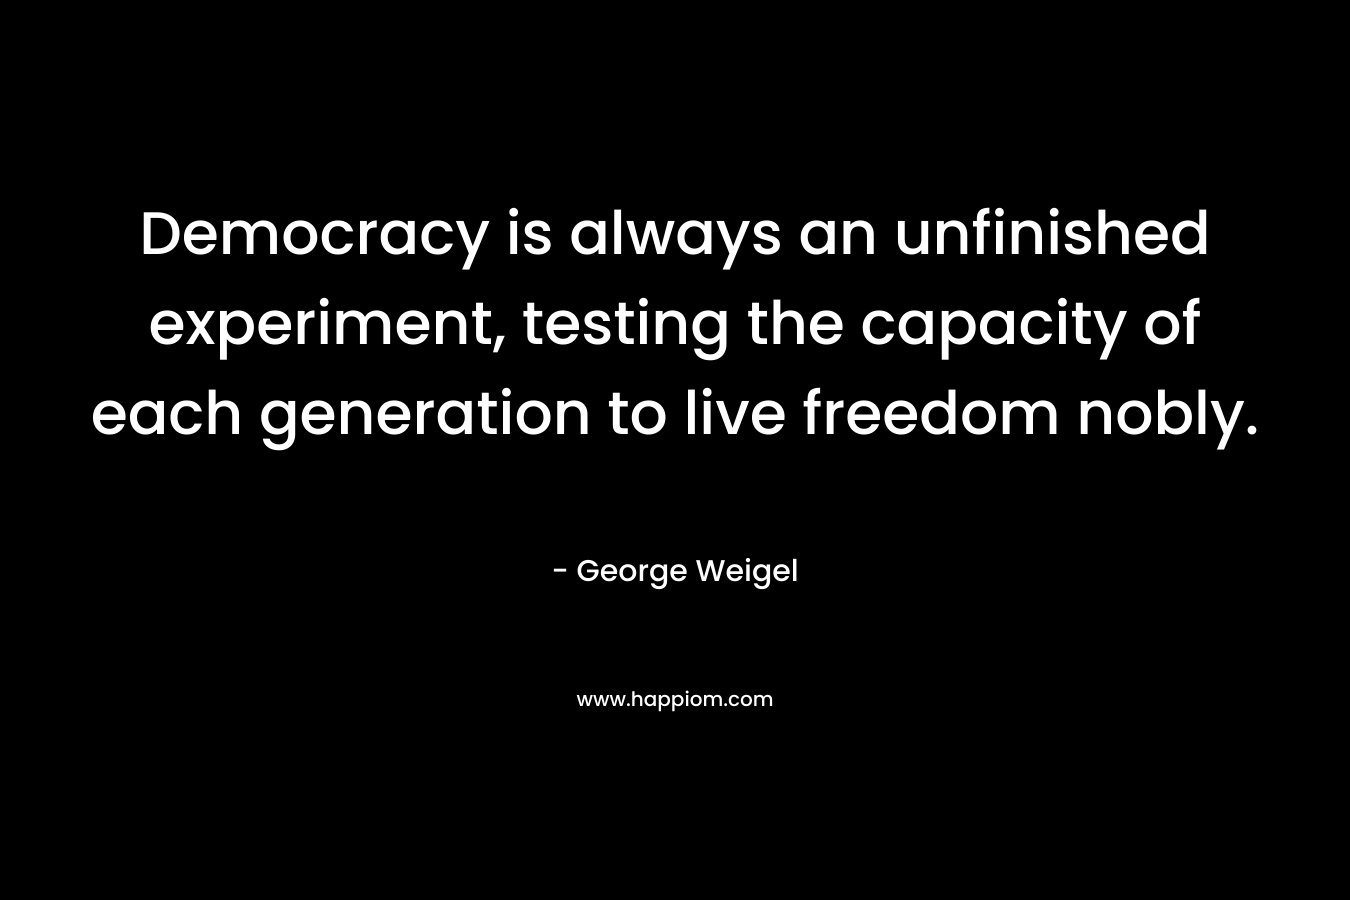 Democracy is always an unfinished experiment, testing the capacity of each generation to live freedom nobly. – George Weigel